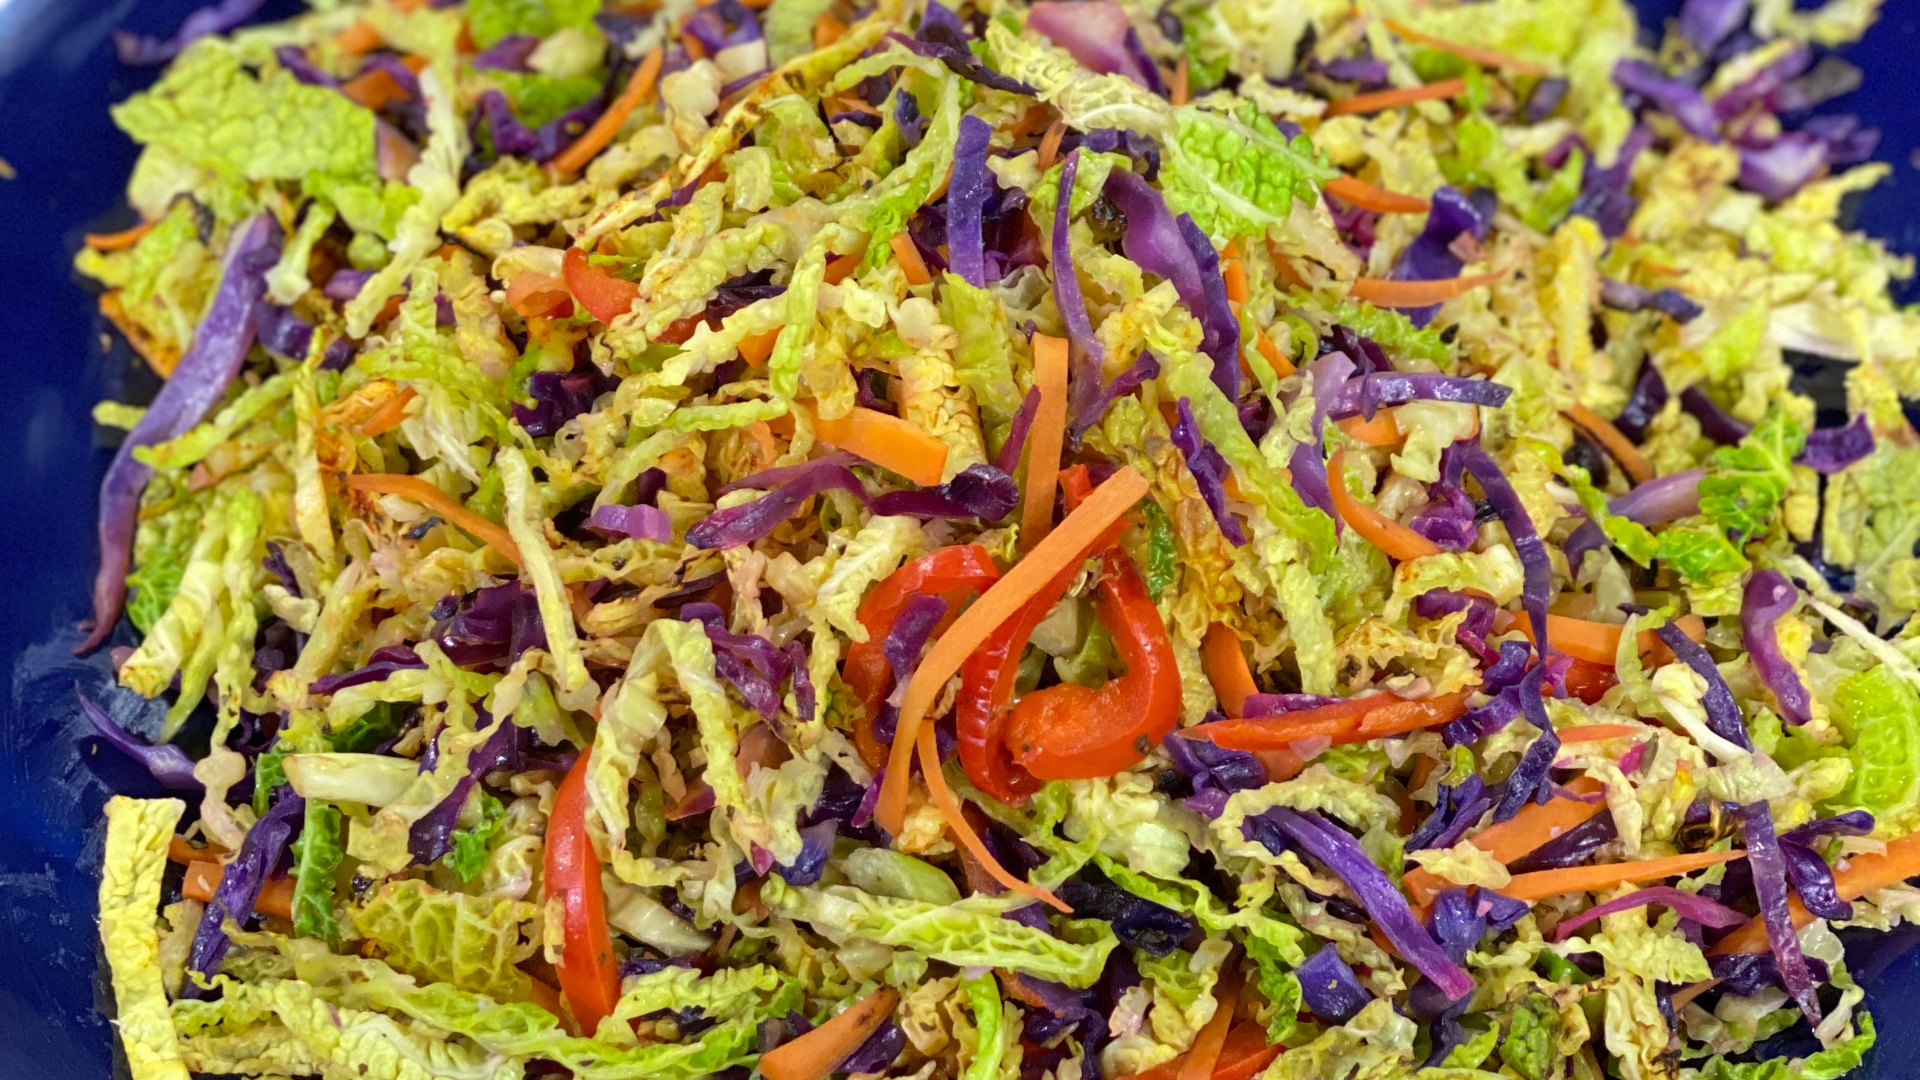 Fennel spiced cabbage